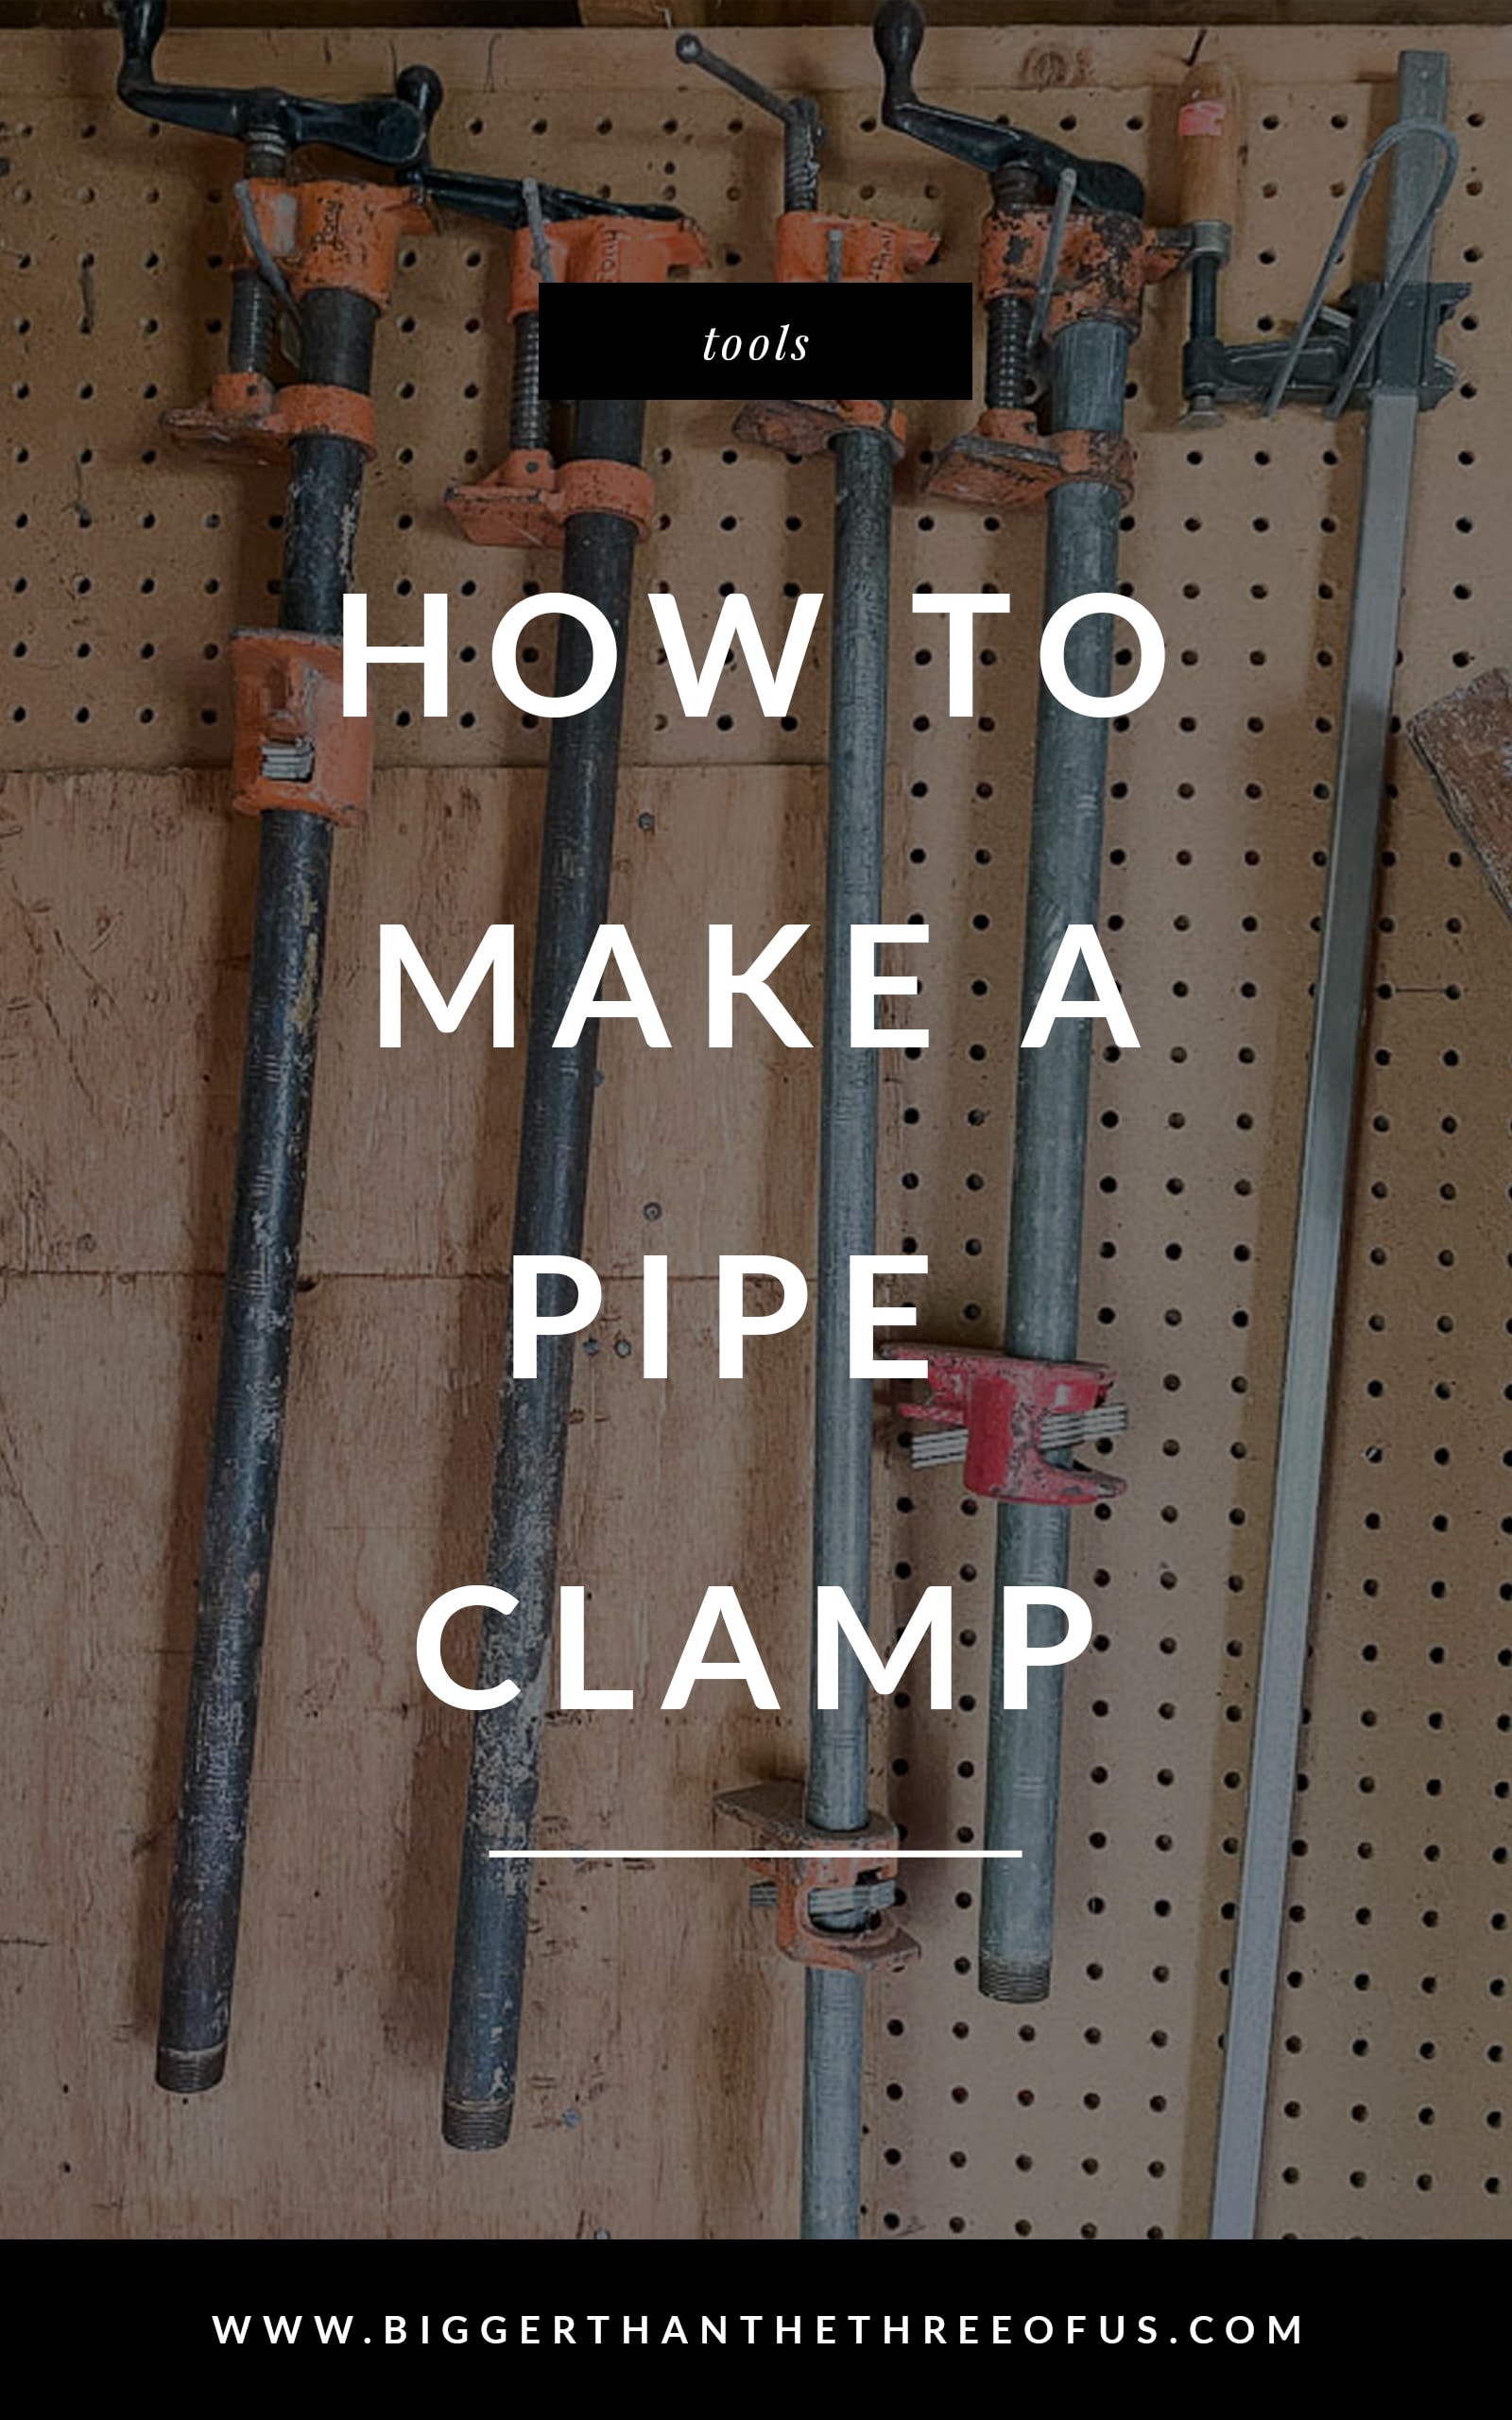 The Best Clamps for Woodworking, Including Strap and Pipe Clamps